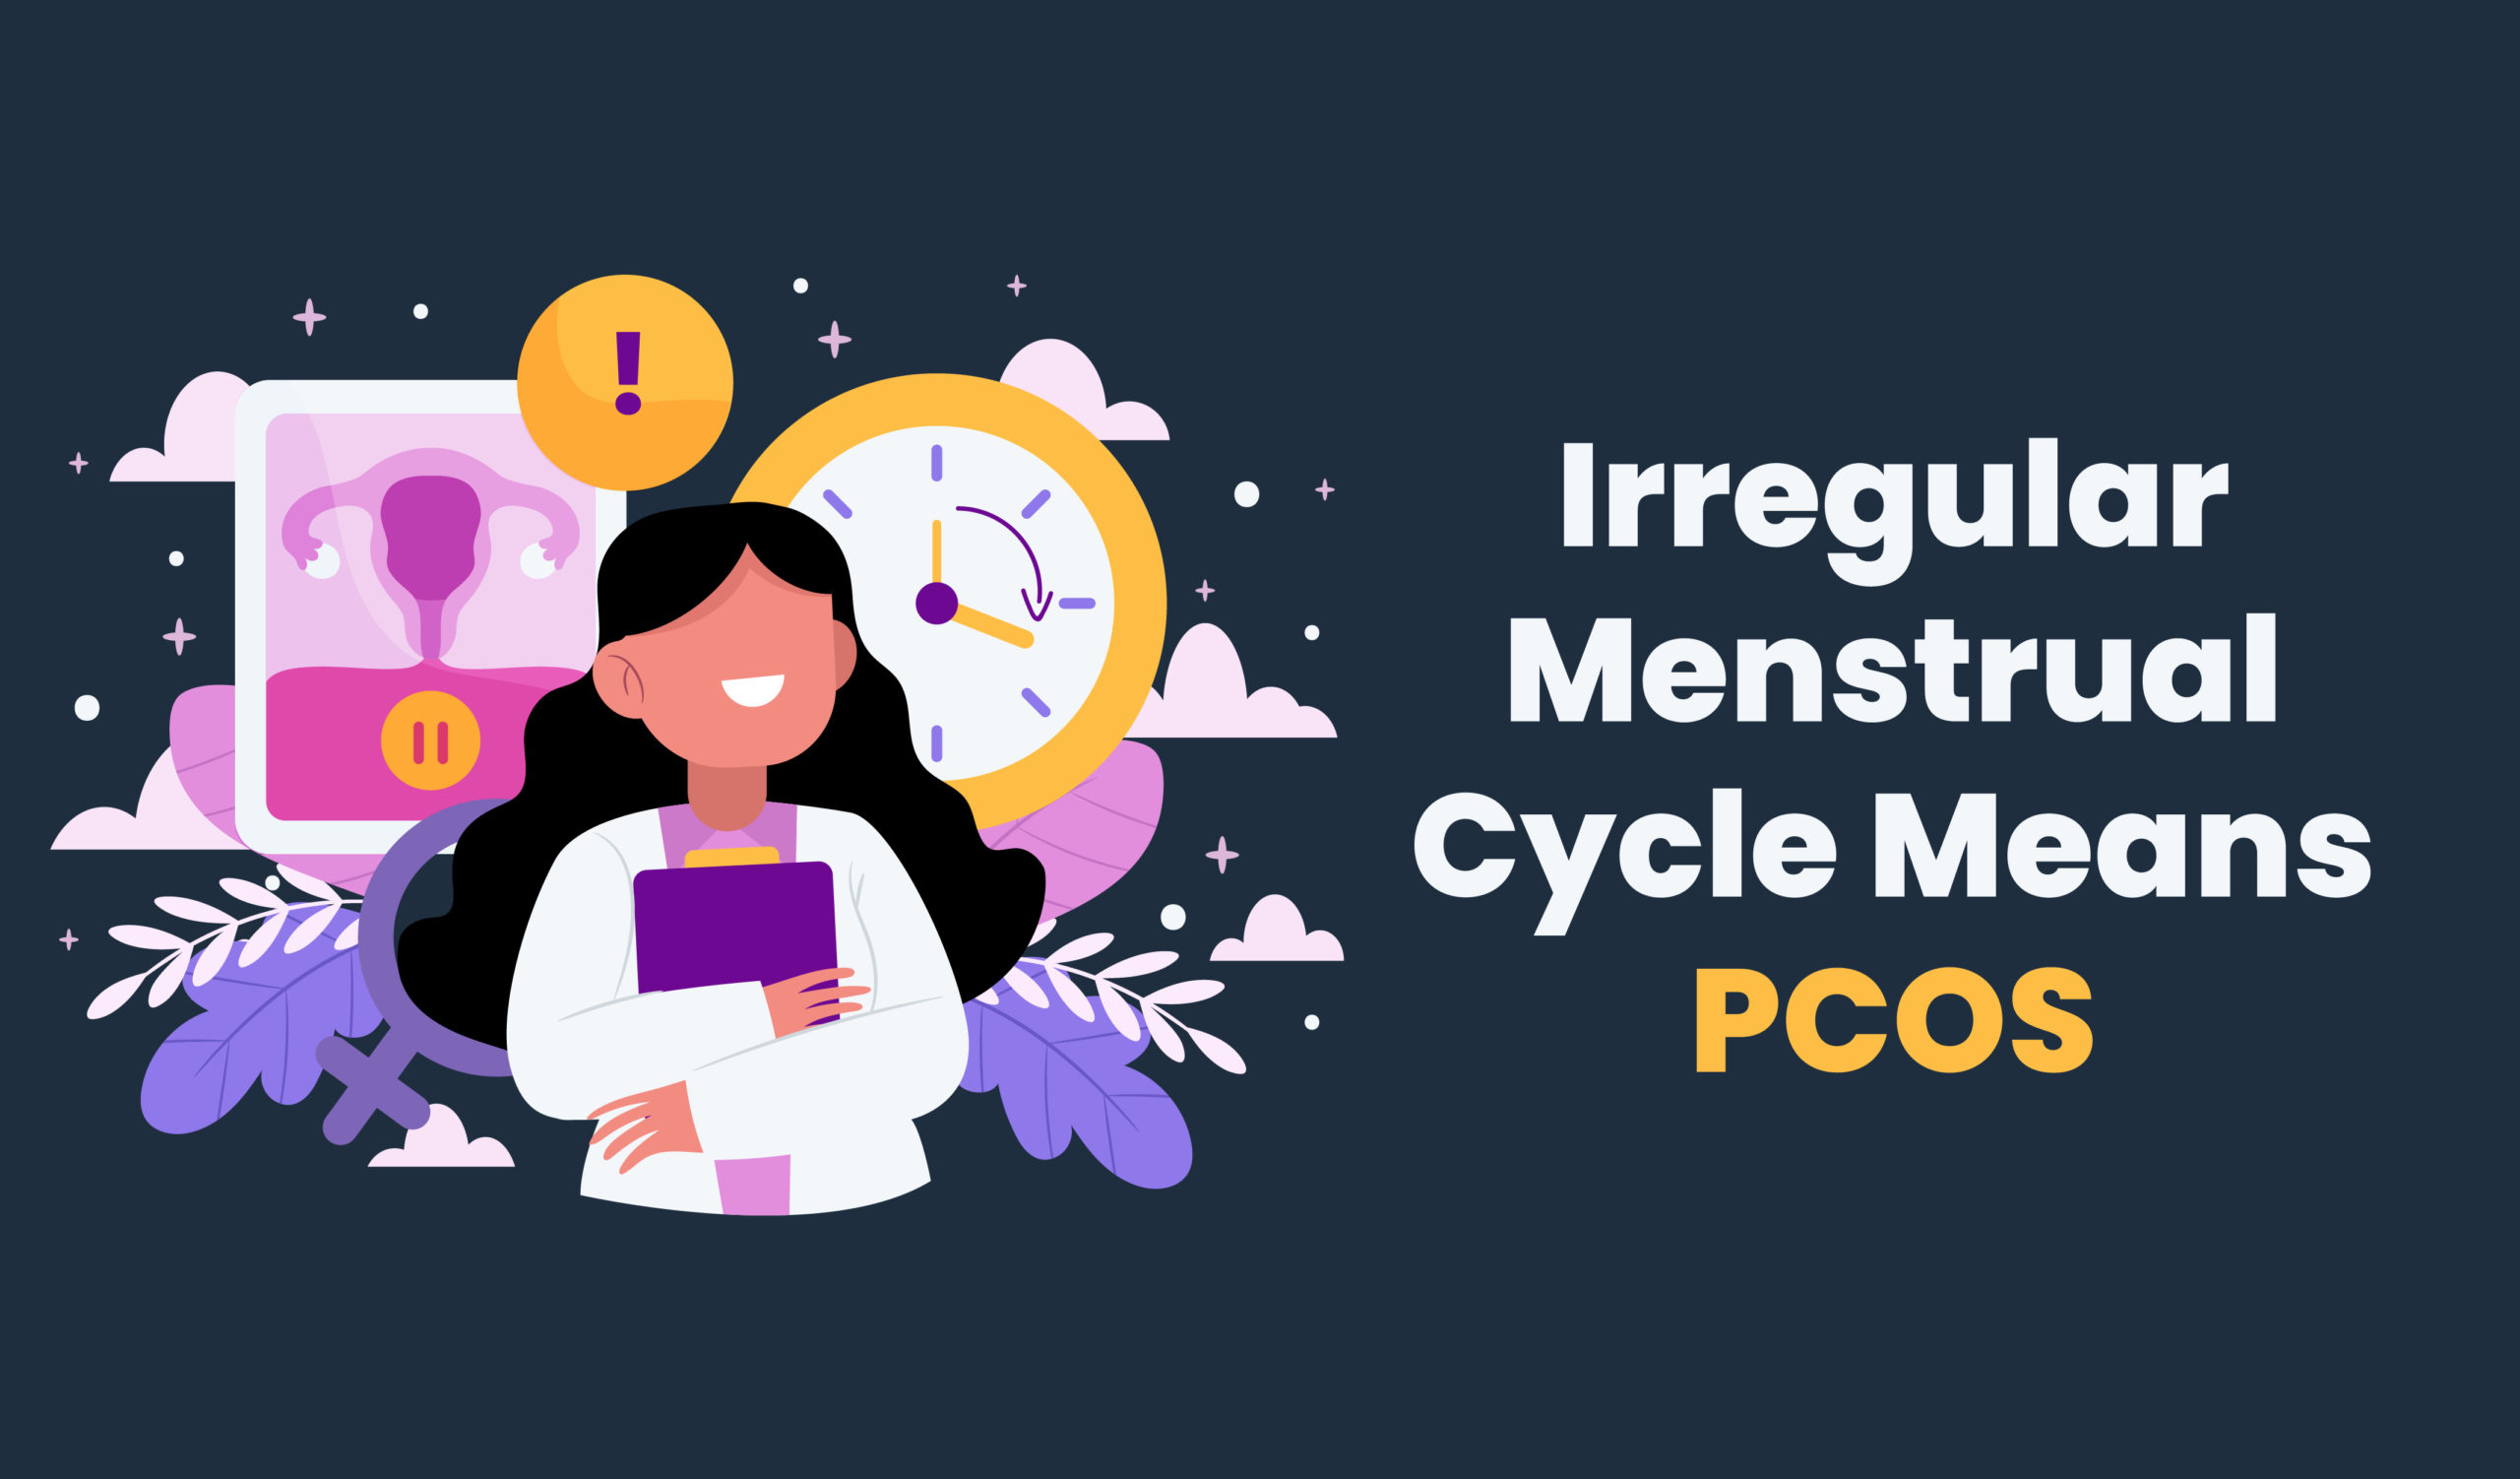 Irregular menstrual cycle means PCOS